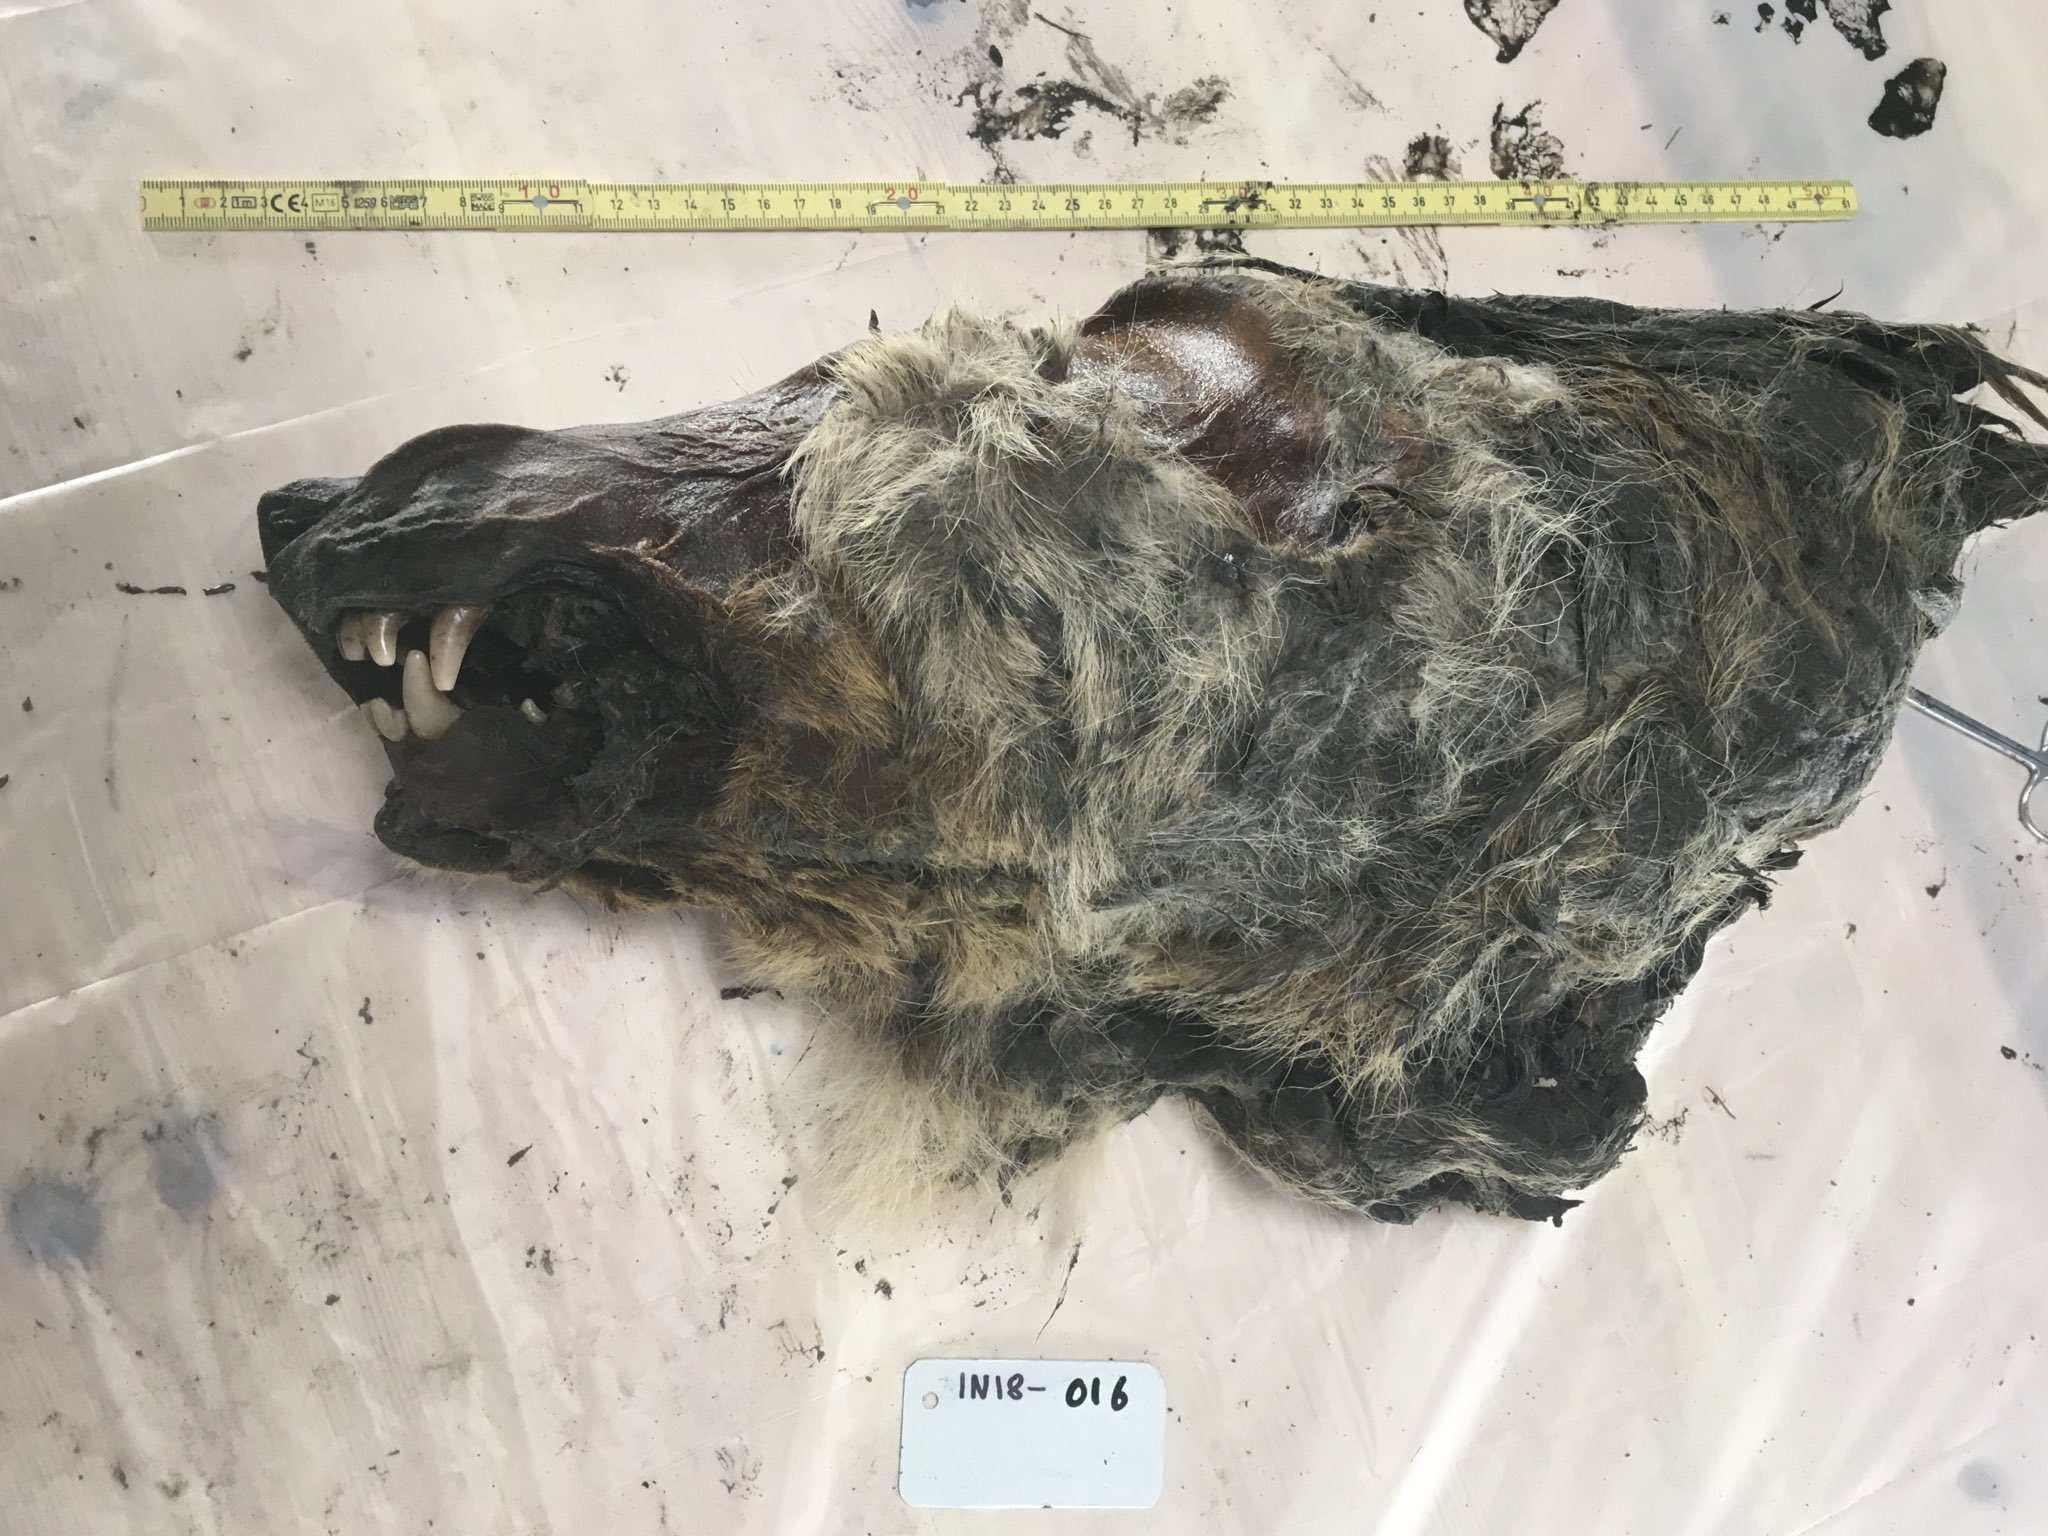 A perfectly preserved 32,000-year-old wolf head was found in Siberian permafrost 5